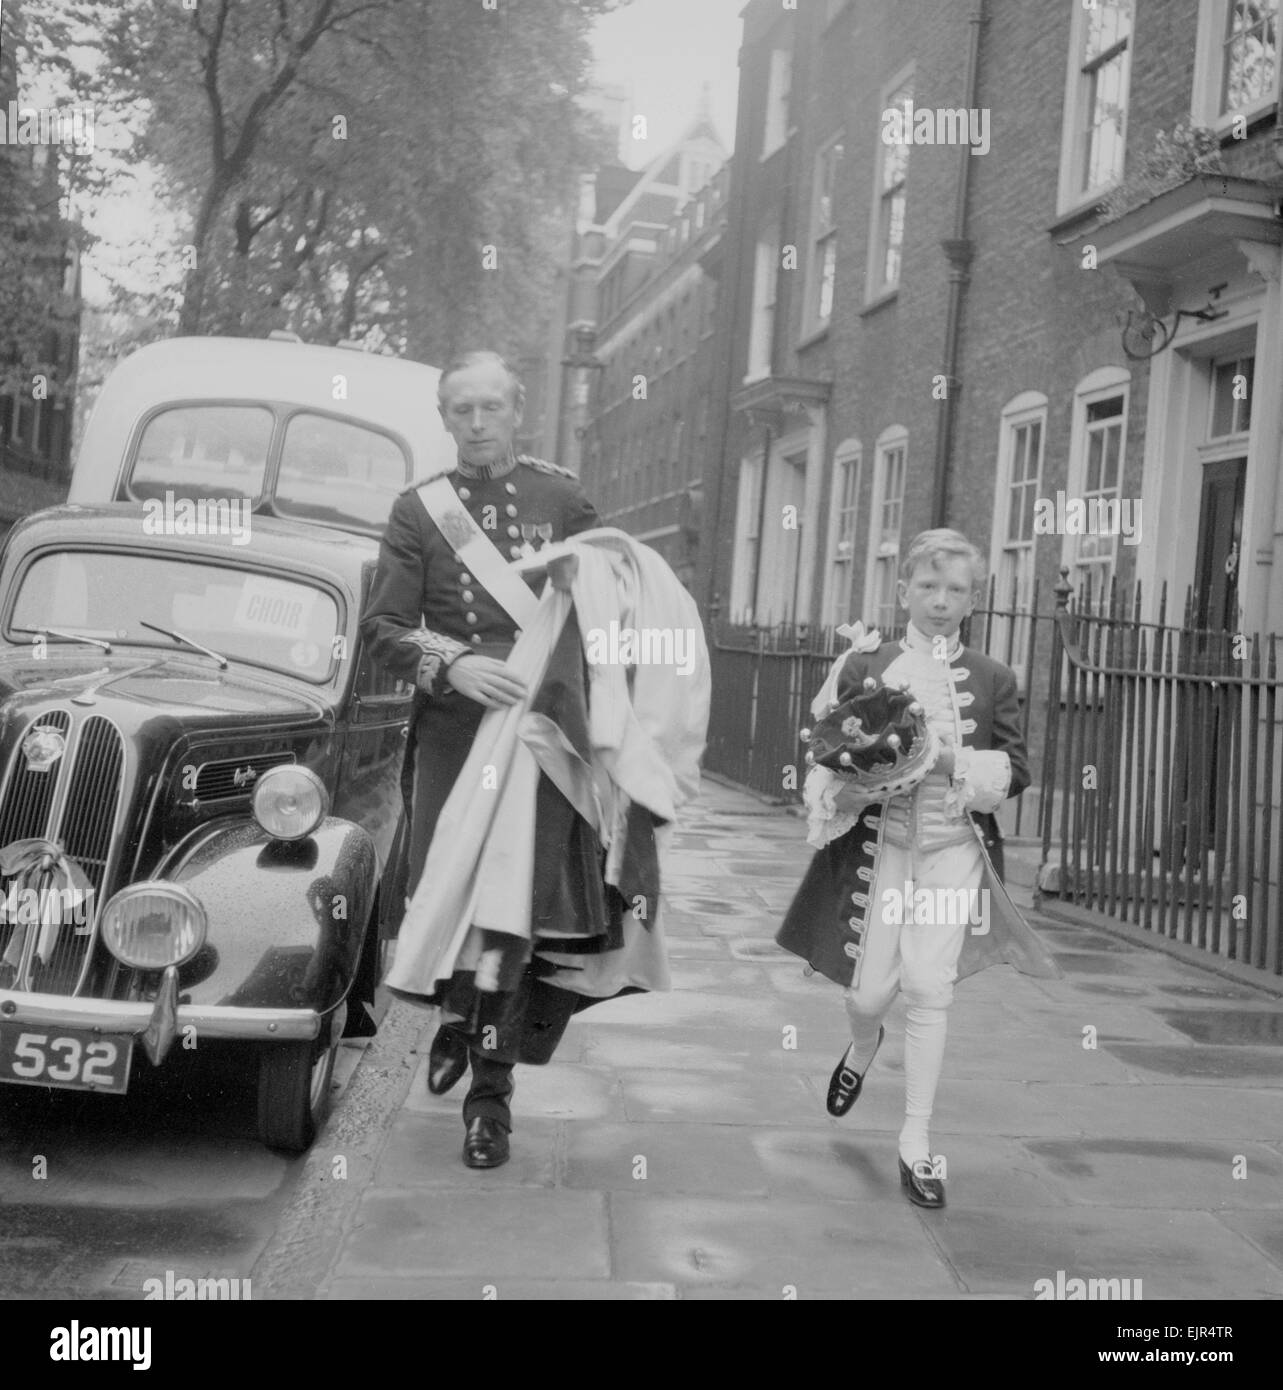 The Coronation of Queen Elizabeth II. The Rt Honourable Alec Douglas Home, 14th Earl of Home, pictured with a page boy en route to Wetminster Abbey. 2nd June 1953. Stock Photo